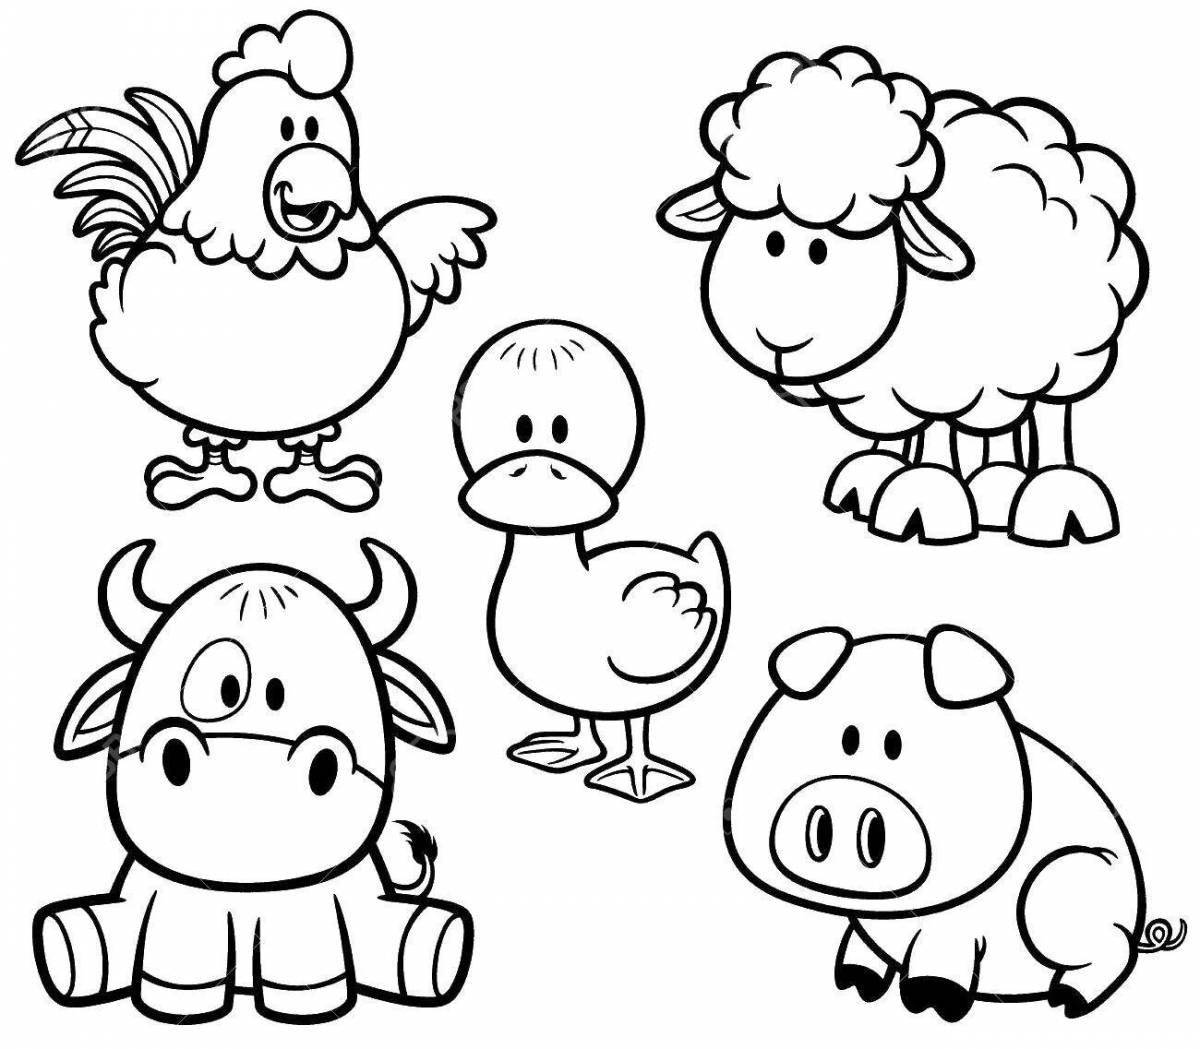 Playable coloring book for kids with animals